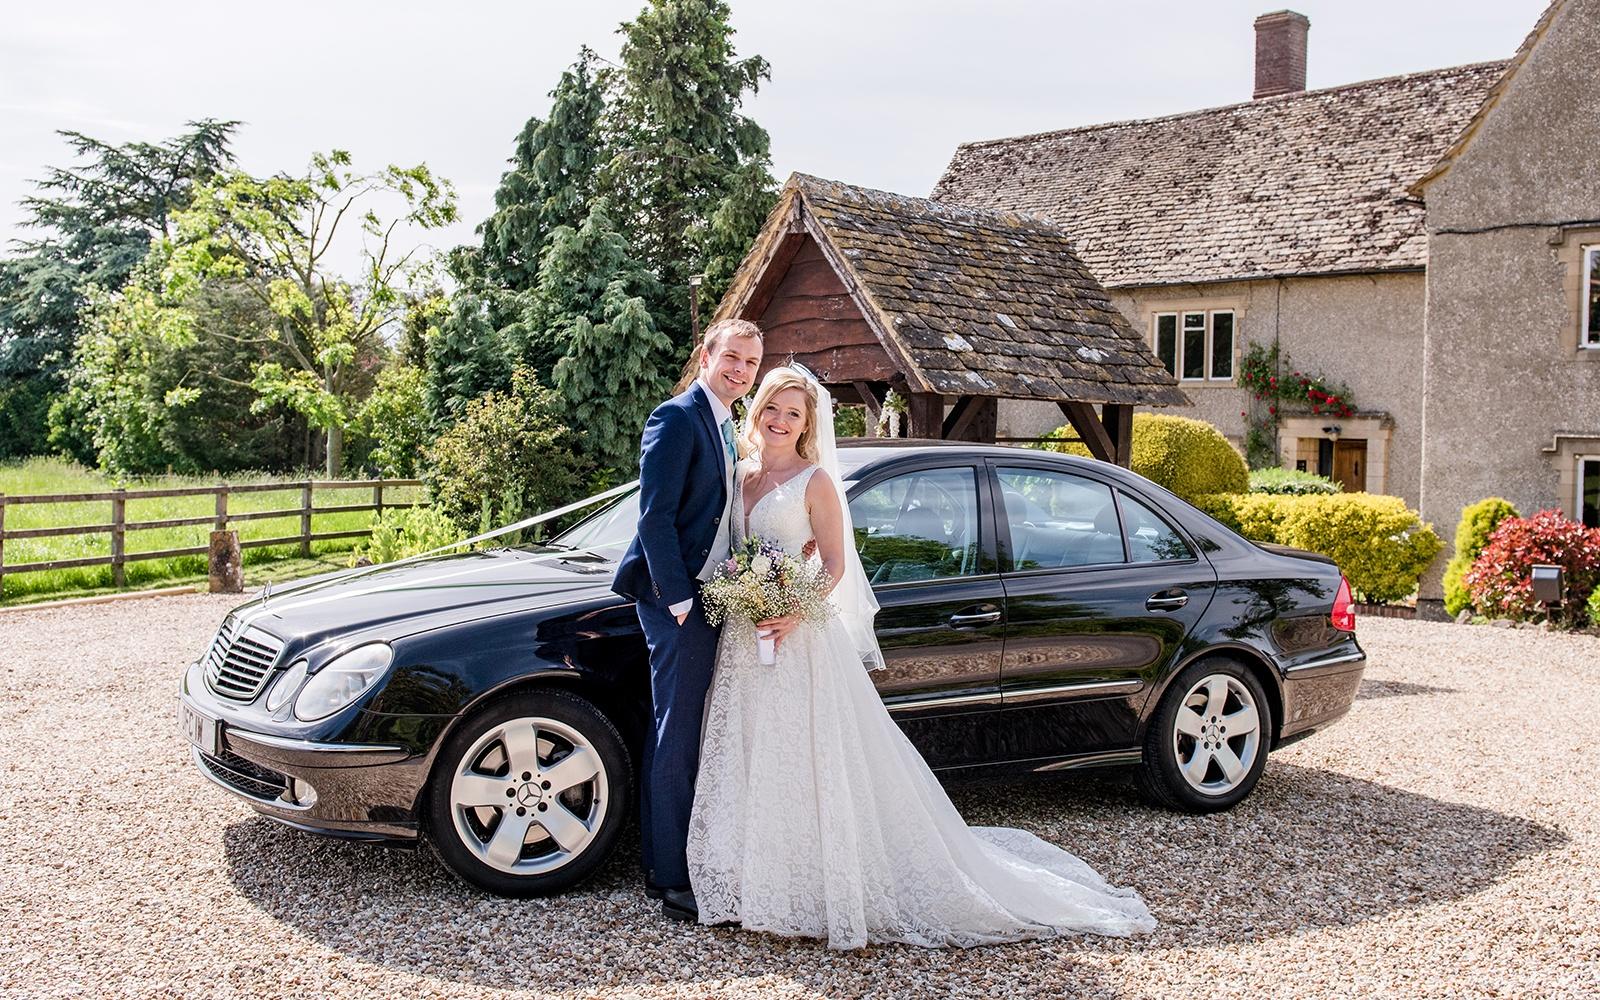 Capture Every Moment real wedding photography duo photographer Cirencester  Church of St Mary The Virgin Bampton Spittleborough Farm Wiltshire wedding car